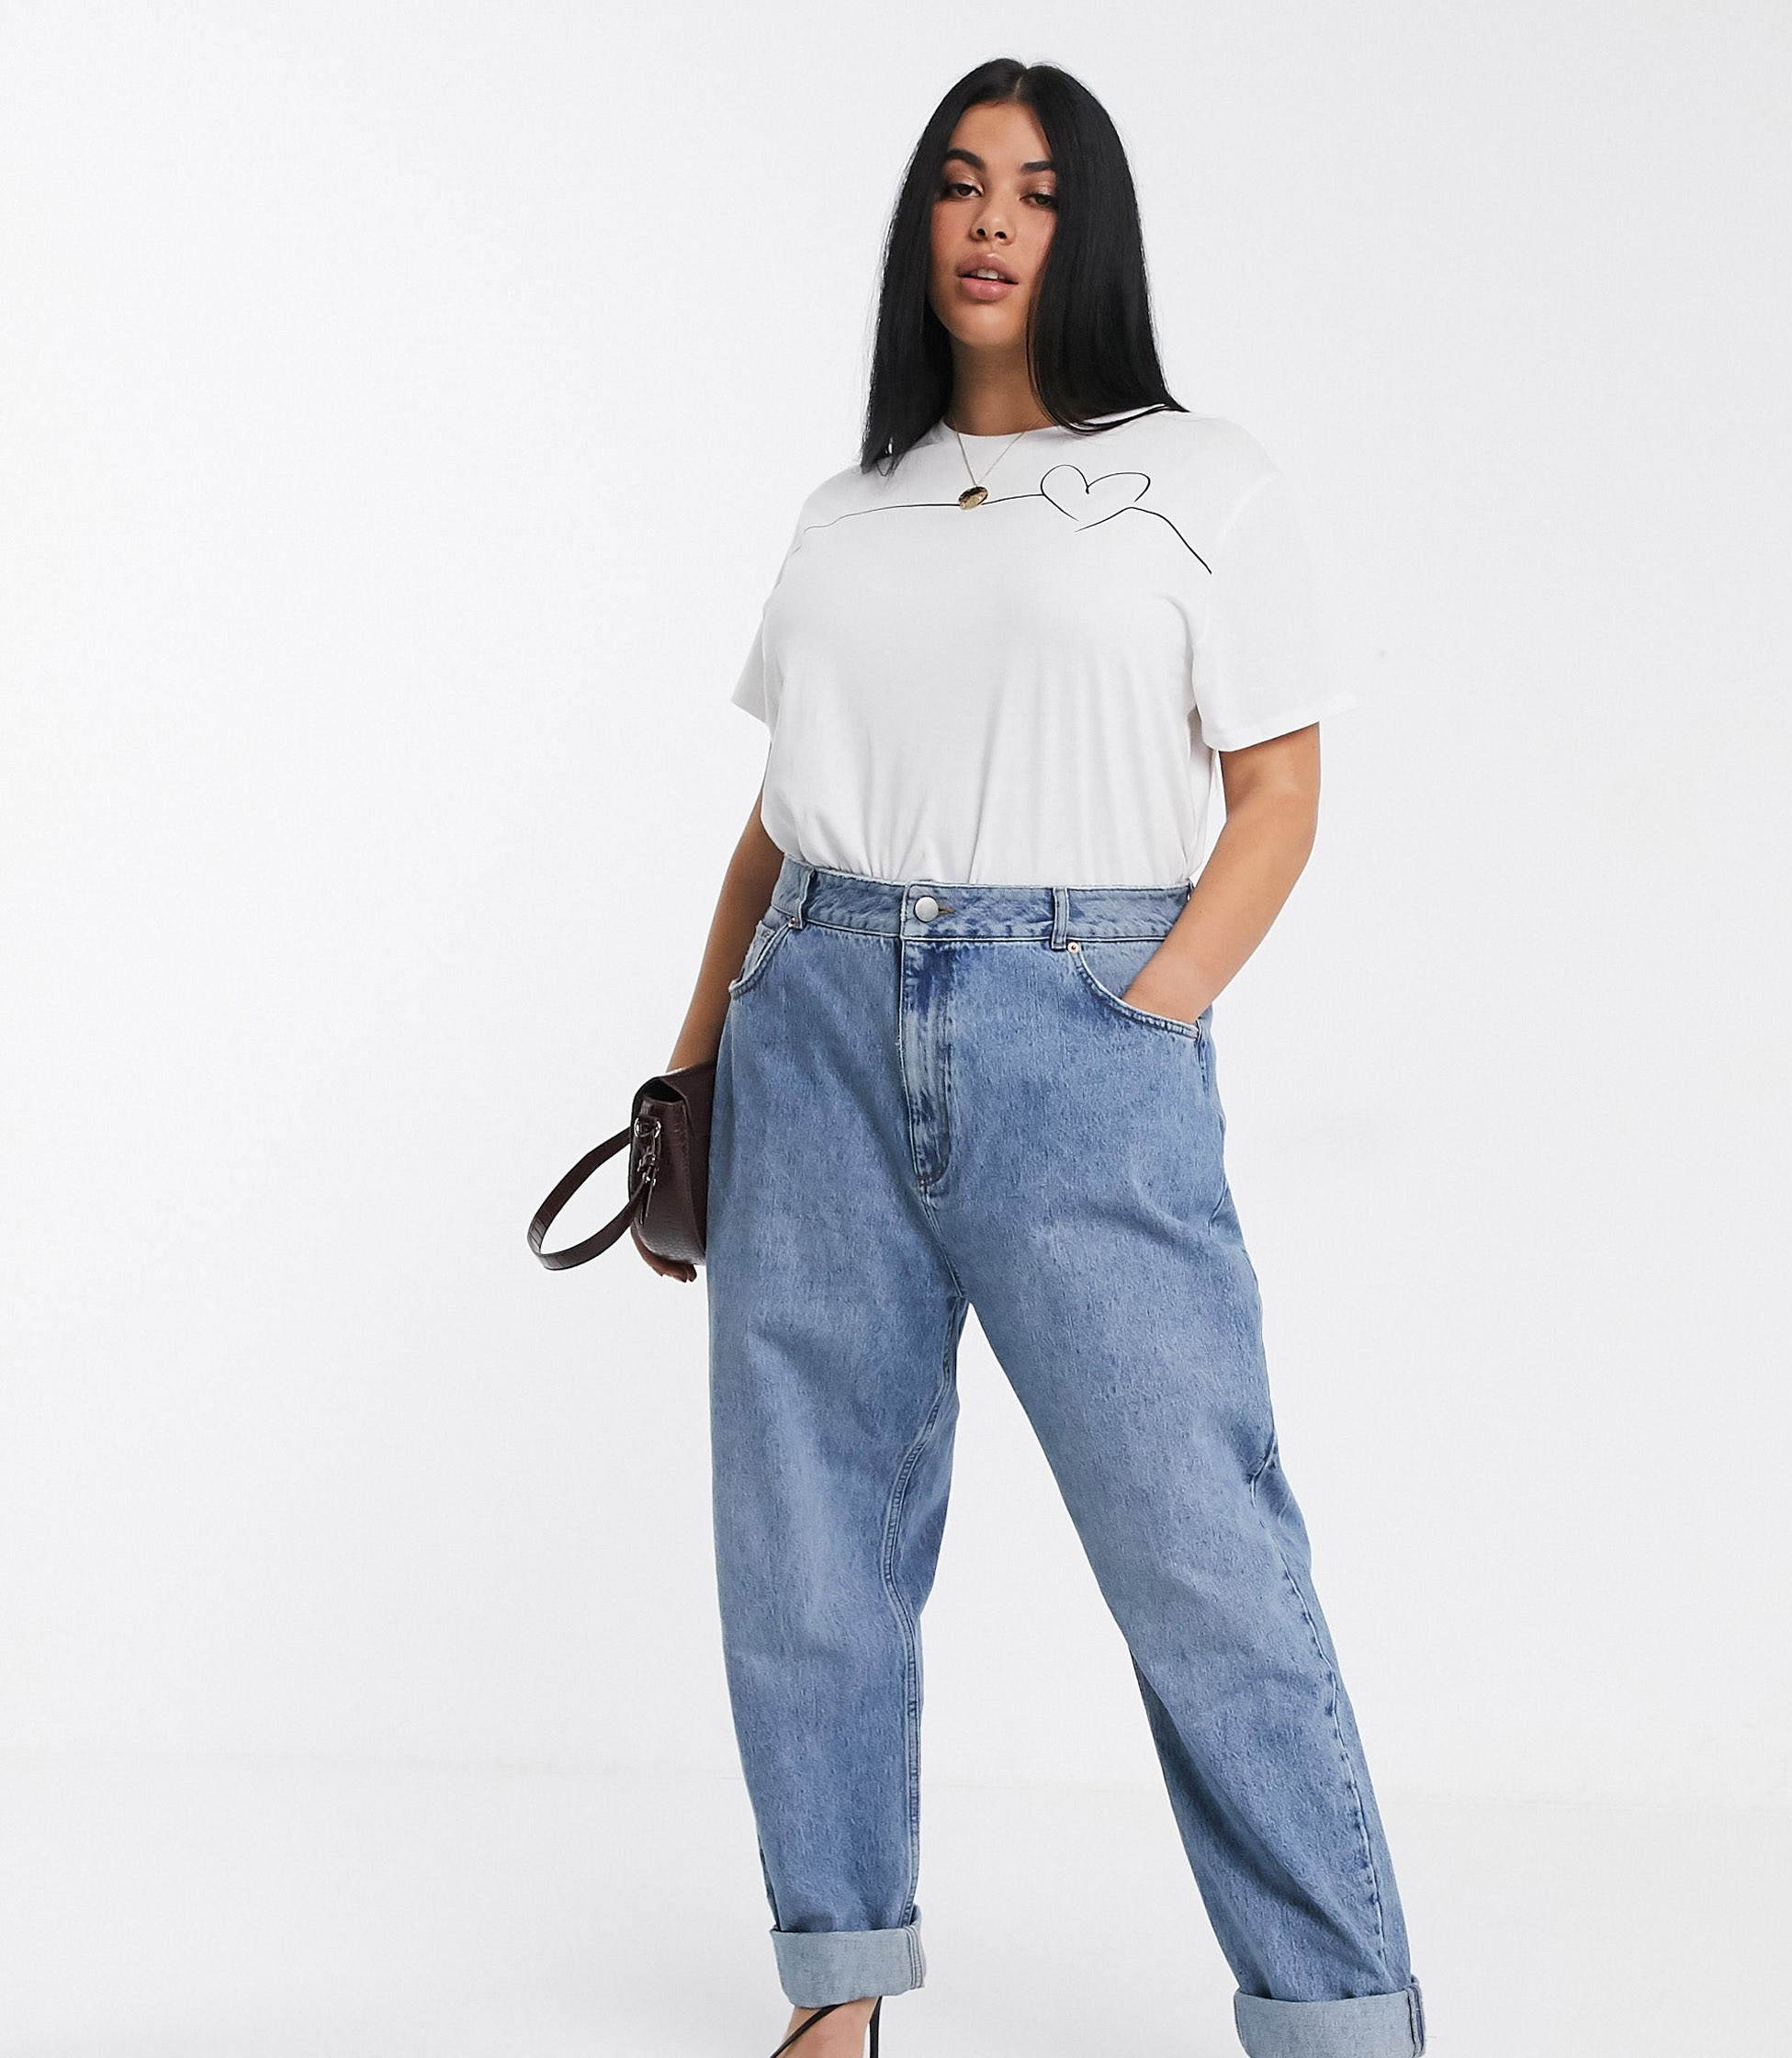 asos curve mom jeans